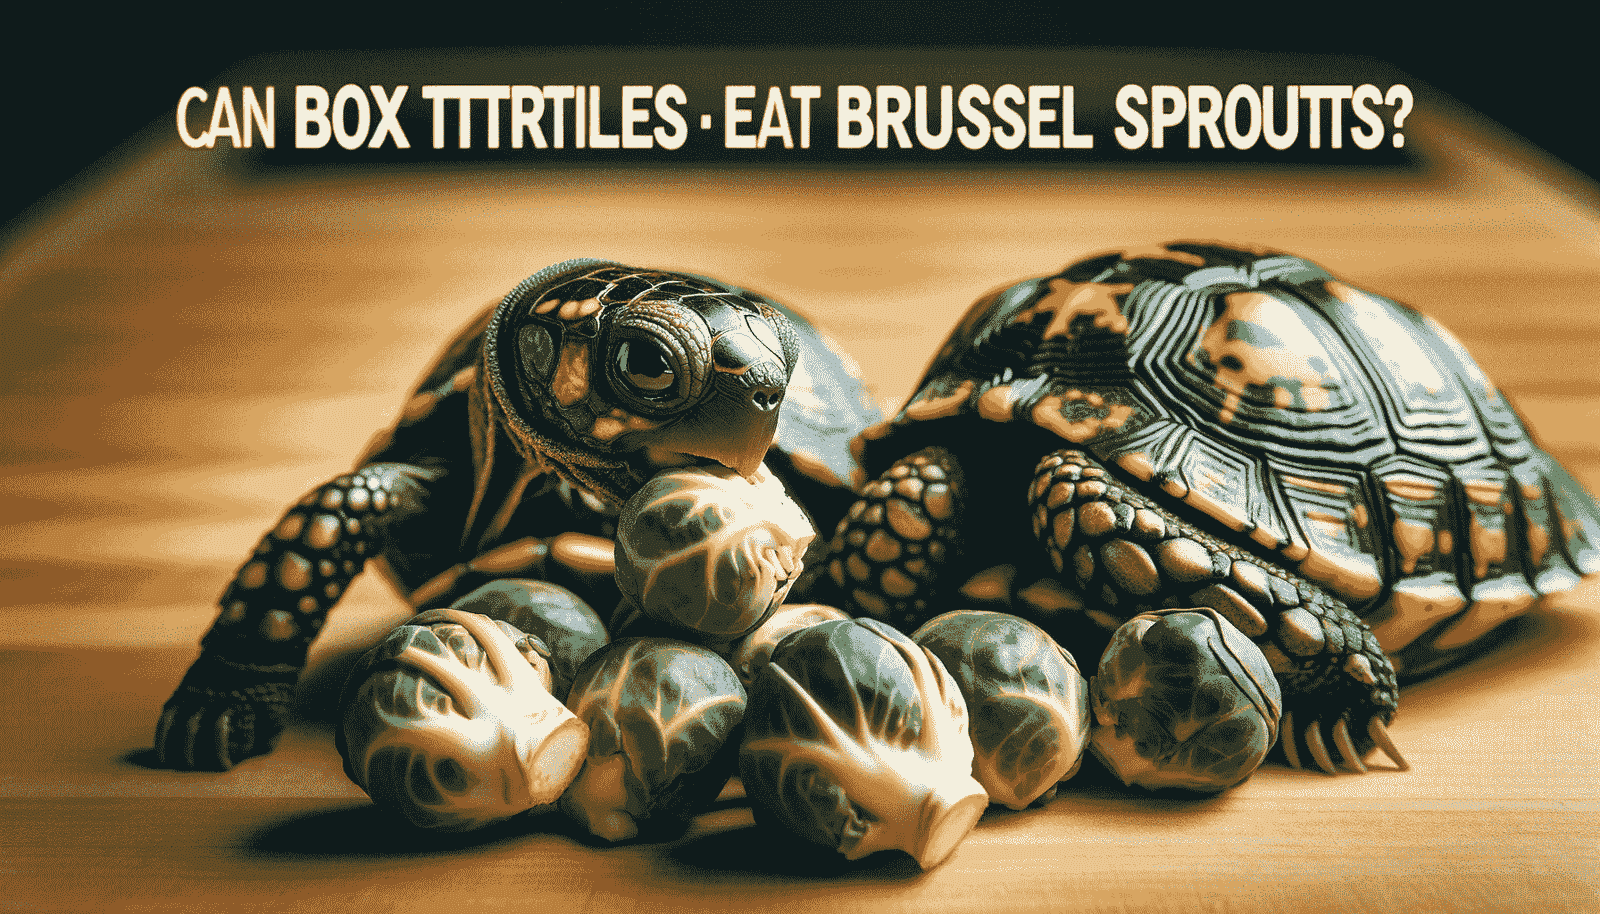 can box turtles eat brussel sprout